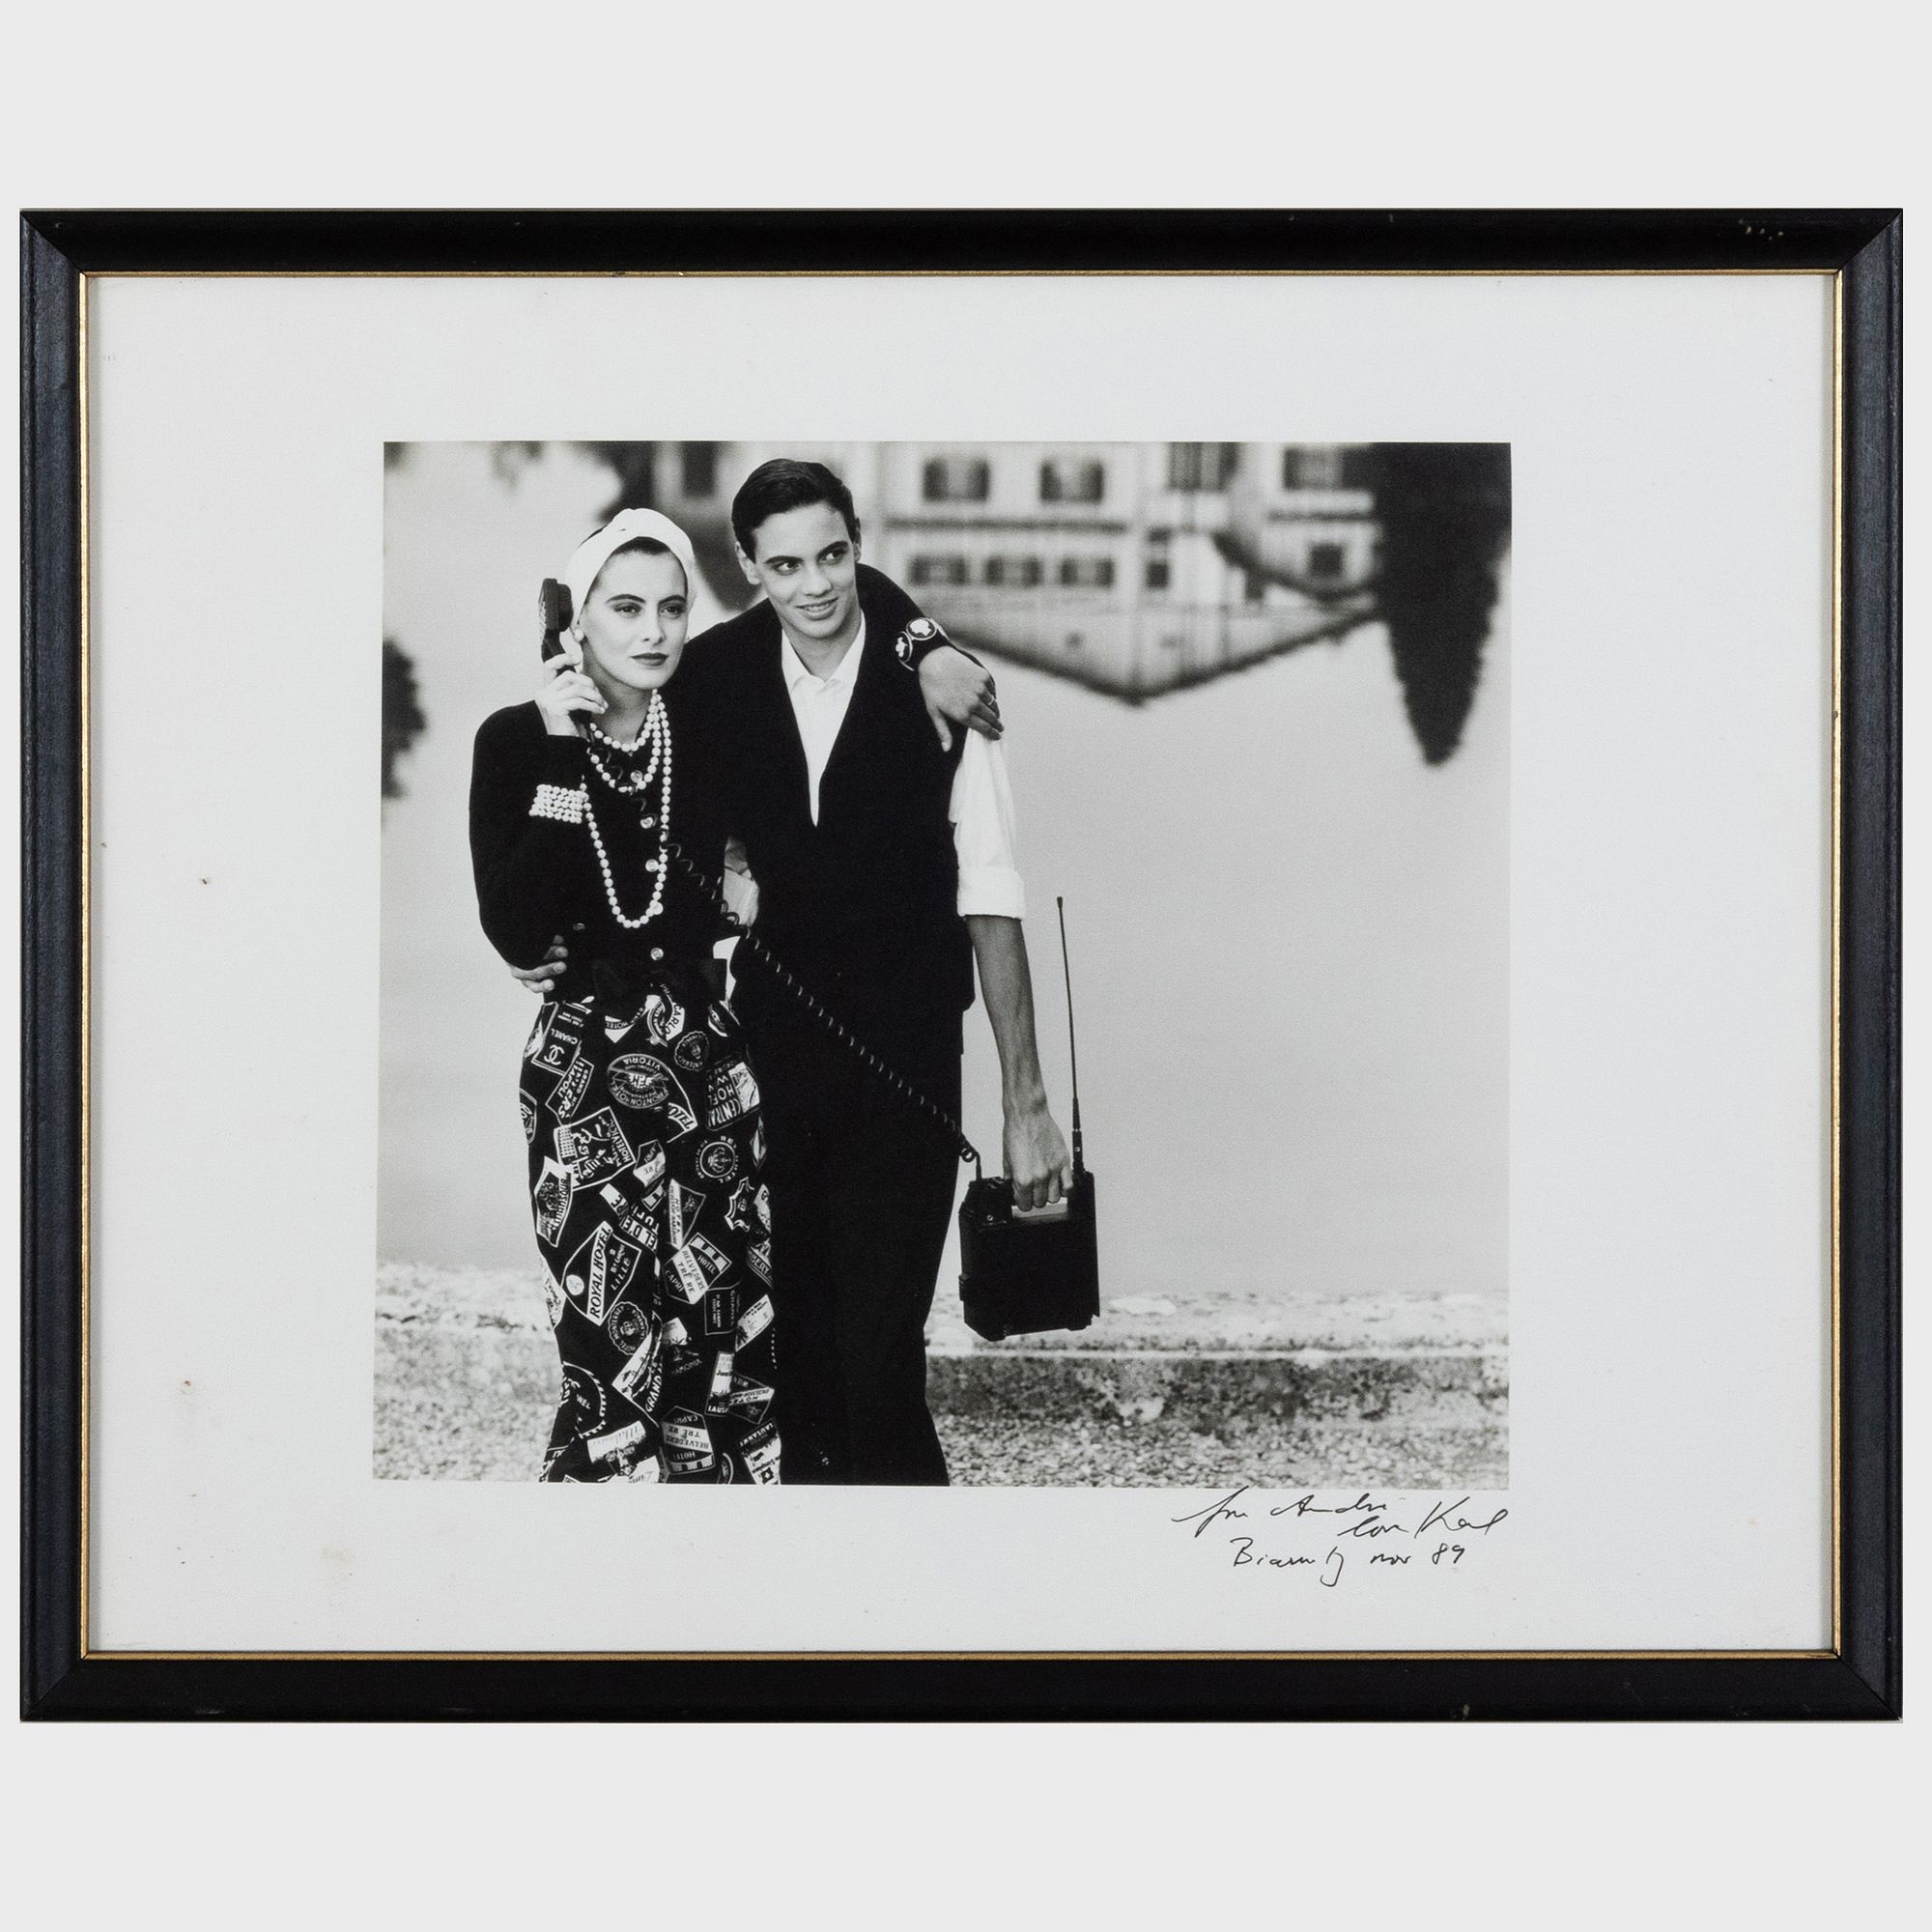 From the Collection: Karl Lagerfeld Photographs